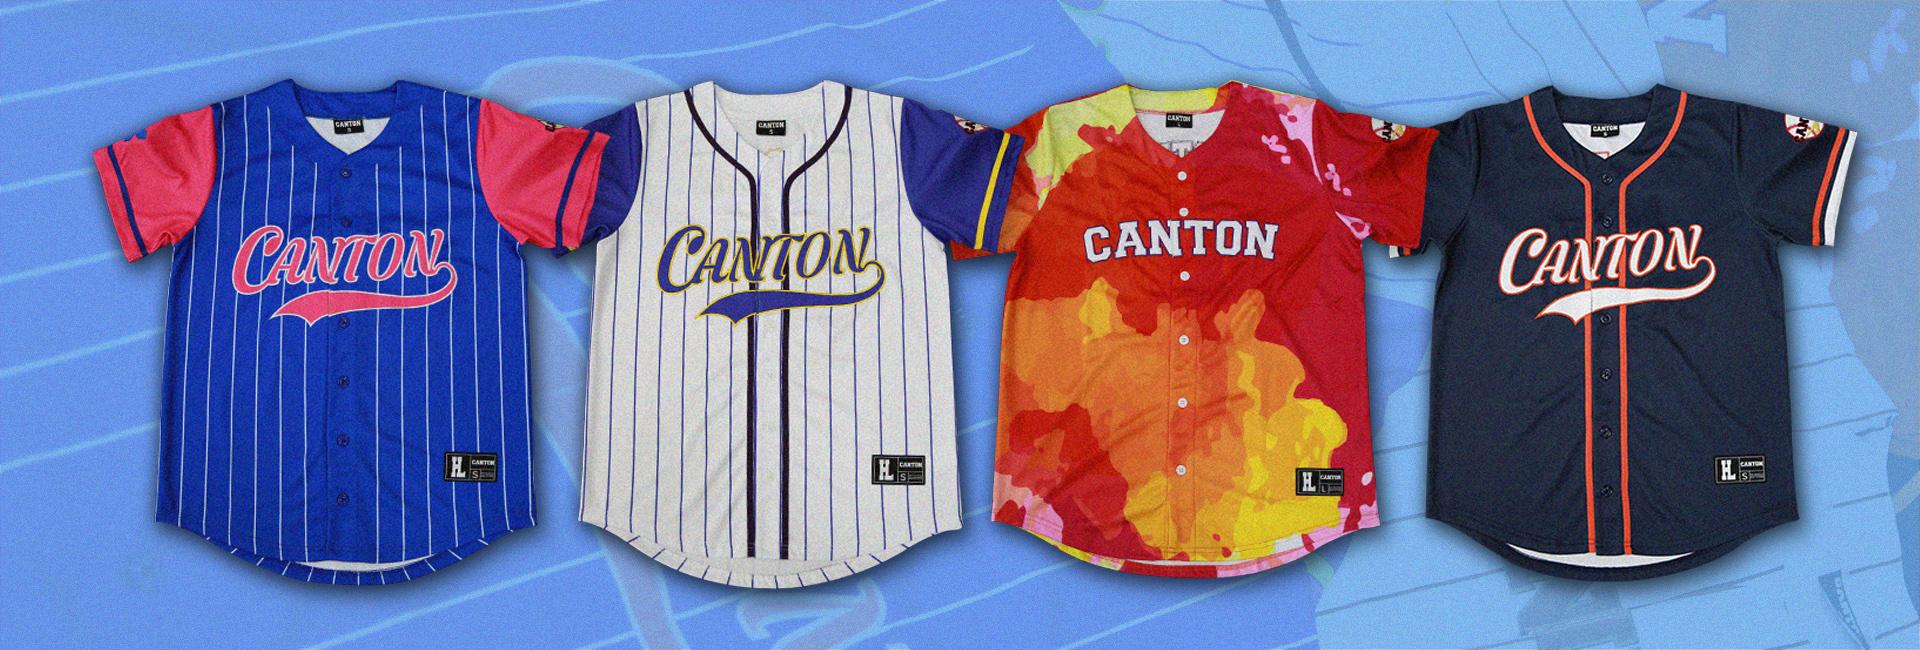 china baseball jerseys, china baseball jerseys Suppliers and Manufacturers  at